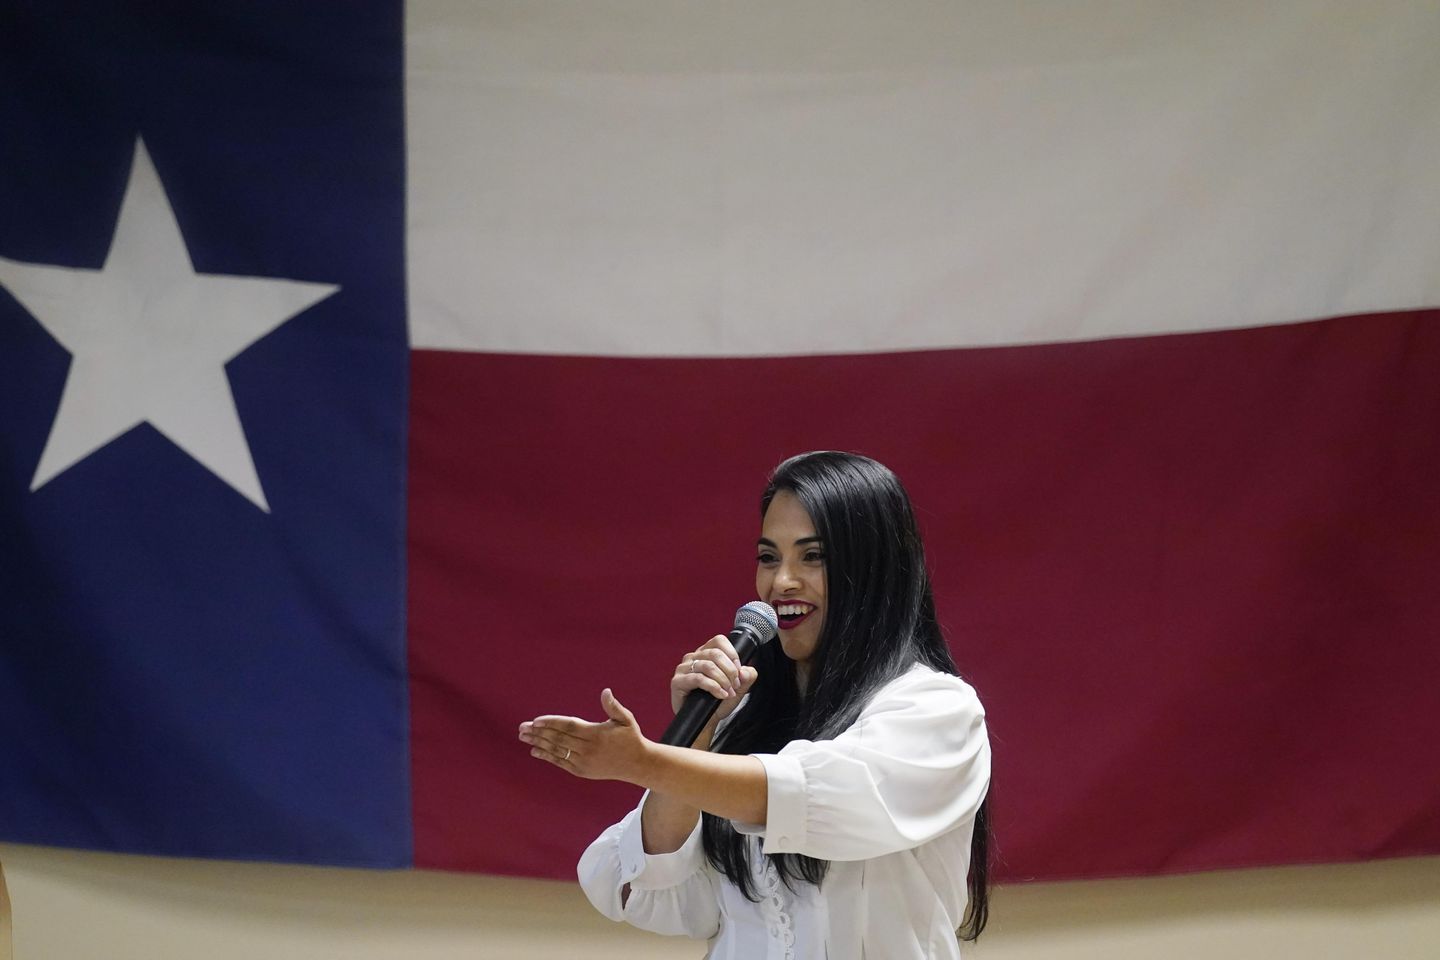 Mayra Flores wins; GOP sees red wave after flipping Texas seat long held by Democrats